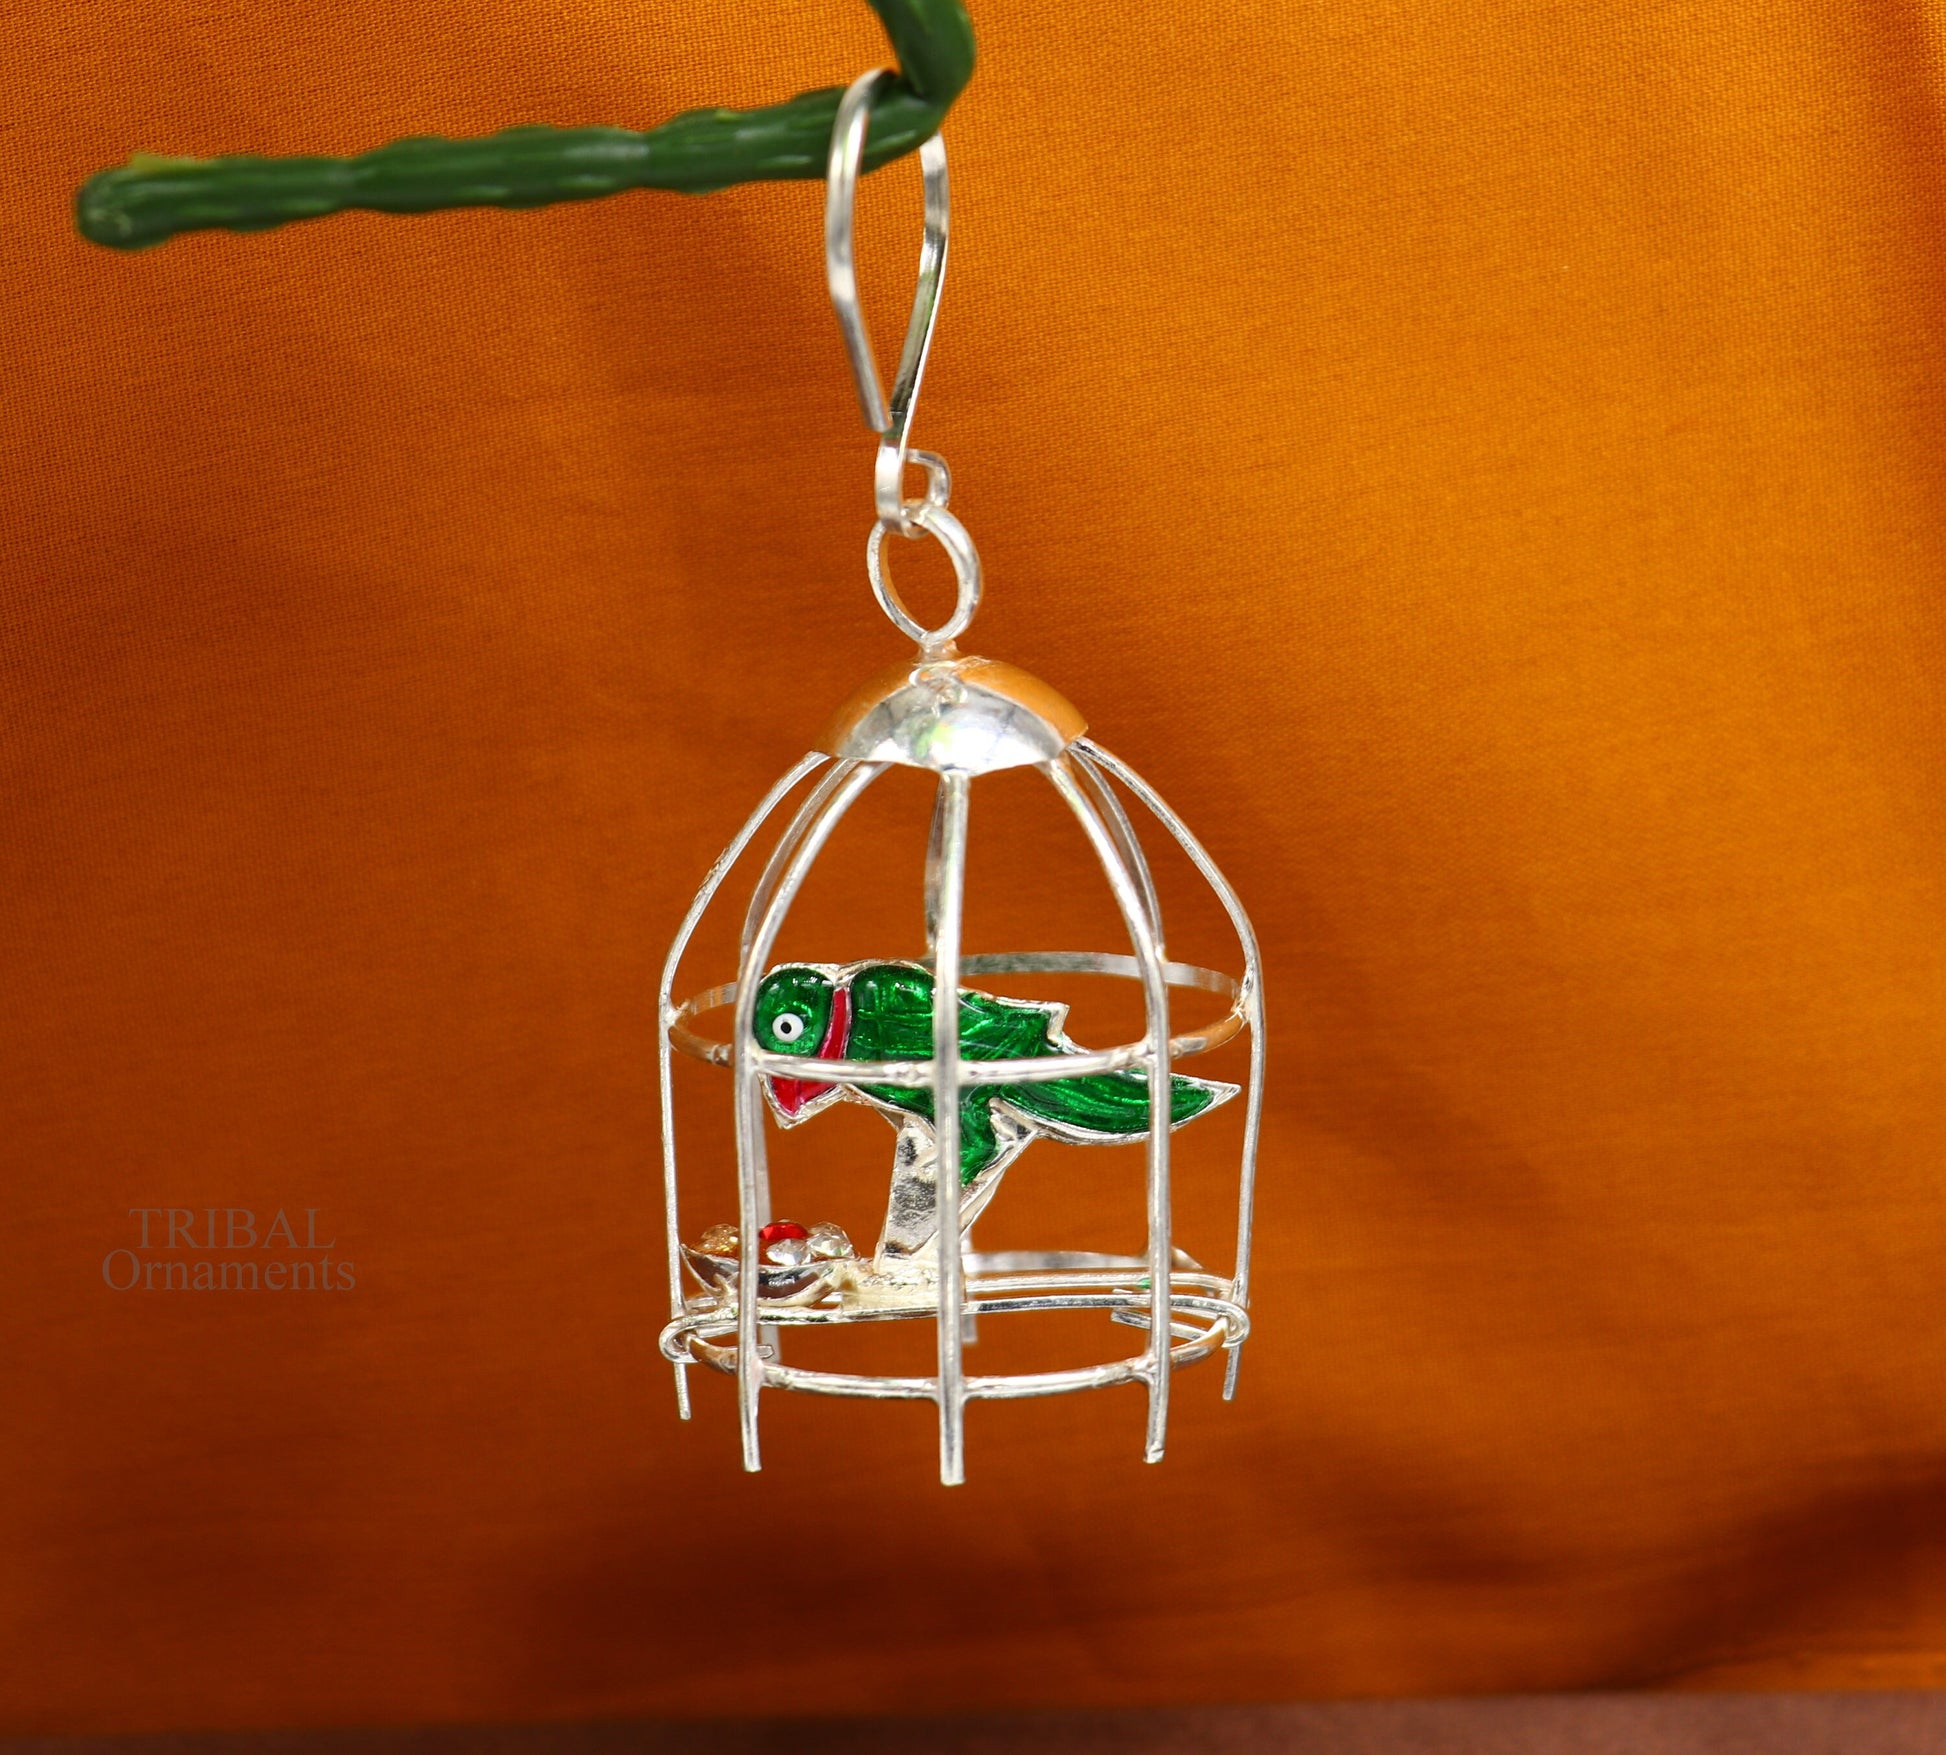 Solid sterling silver handmade toy for idlo krishna, silver parrot with cage, silver article for gifting to God or idol Krishna,  su691 - TRIBAL ORNAMENTS